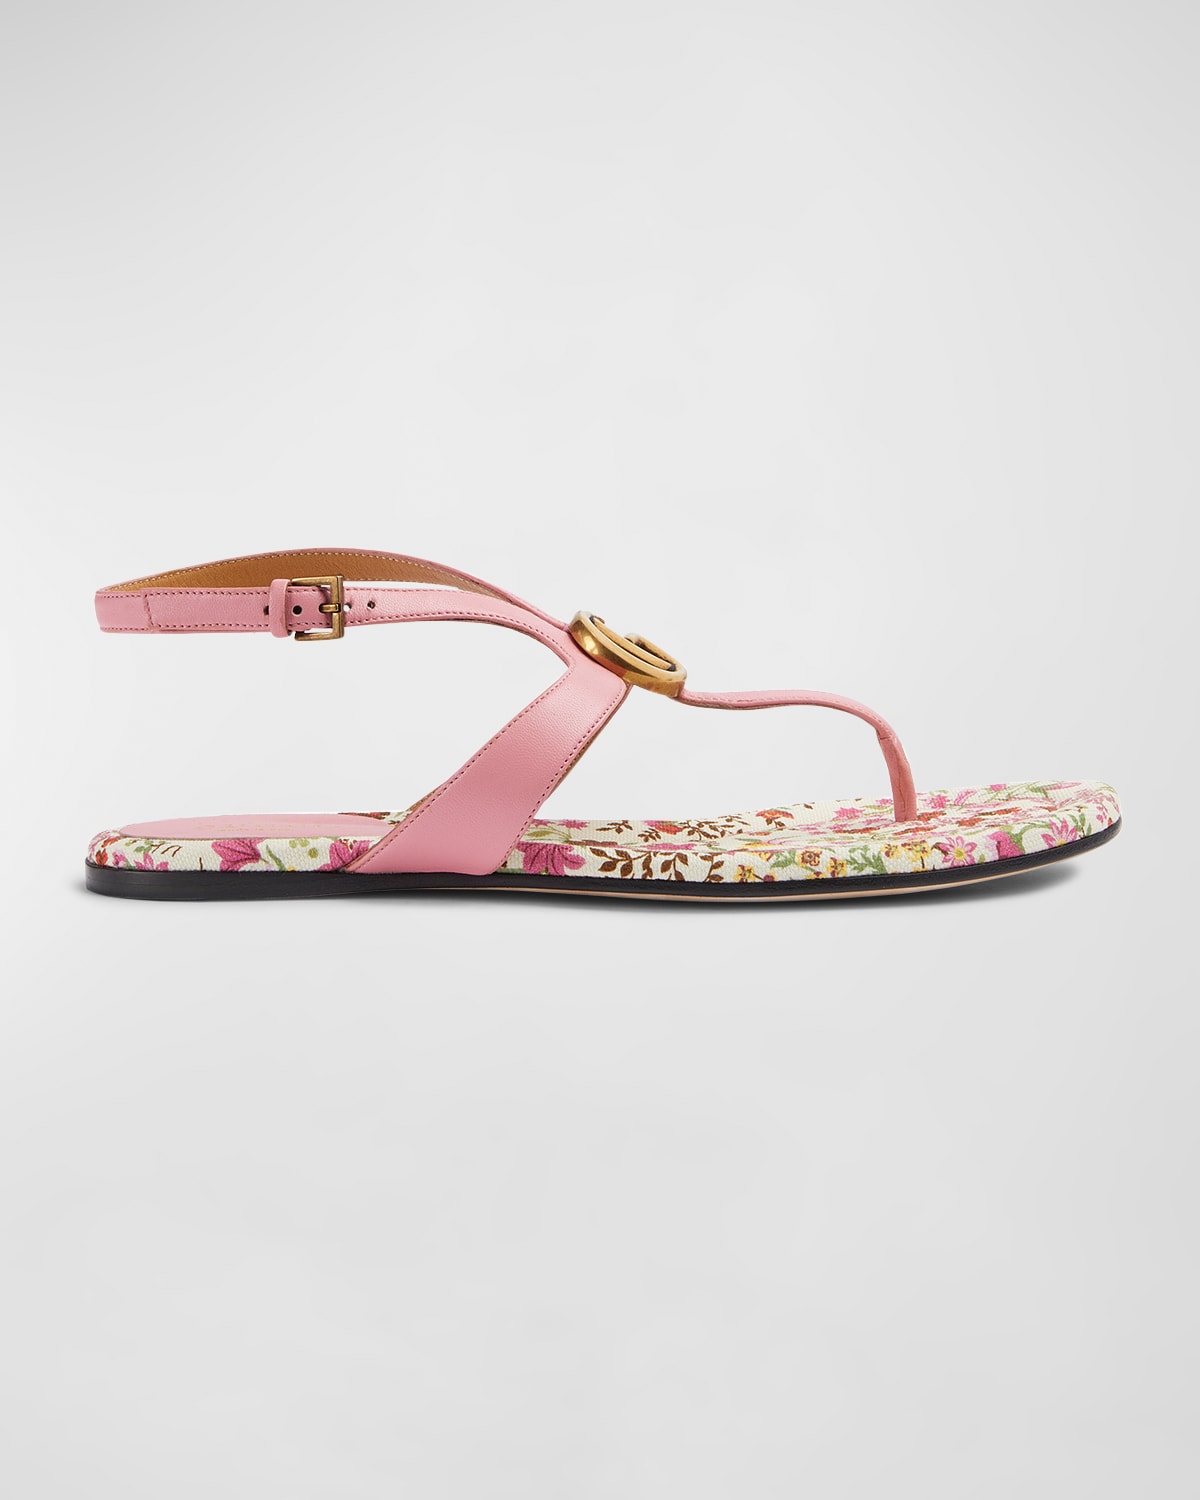 GUCCI DOUBLE G MARMONT LEATHER THONG SANDALS